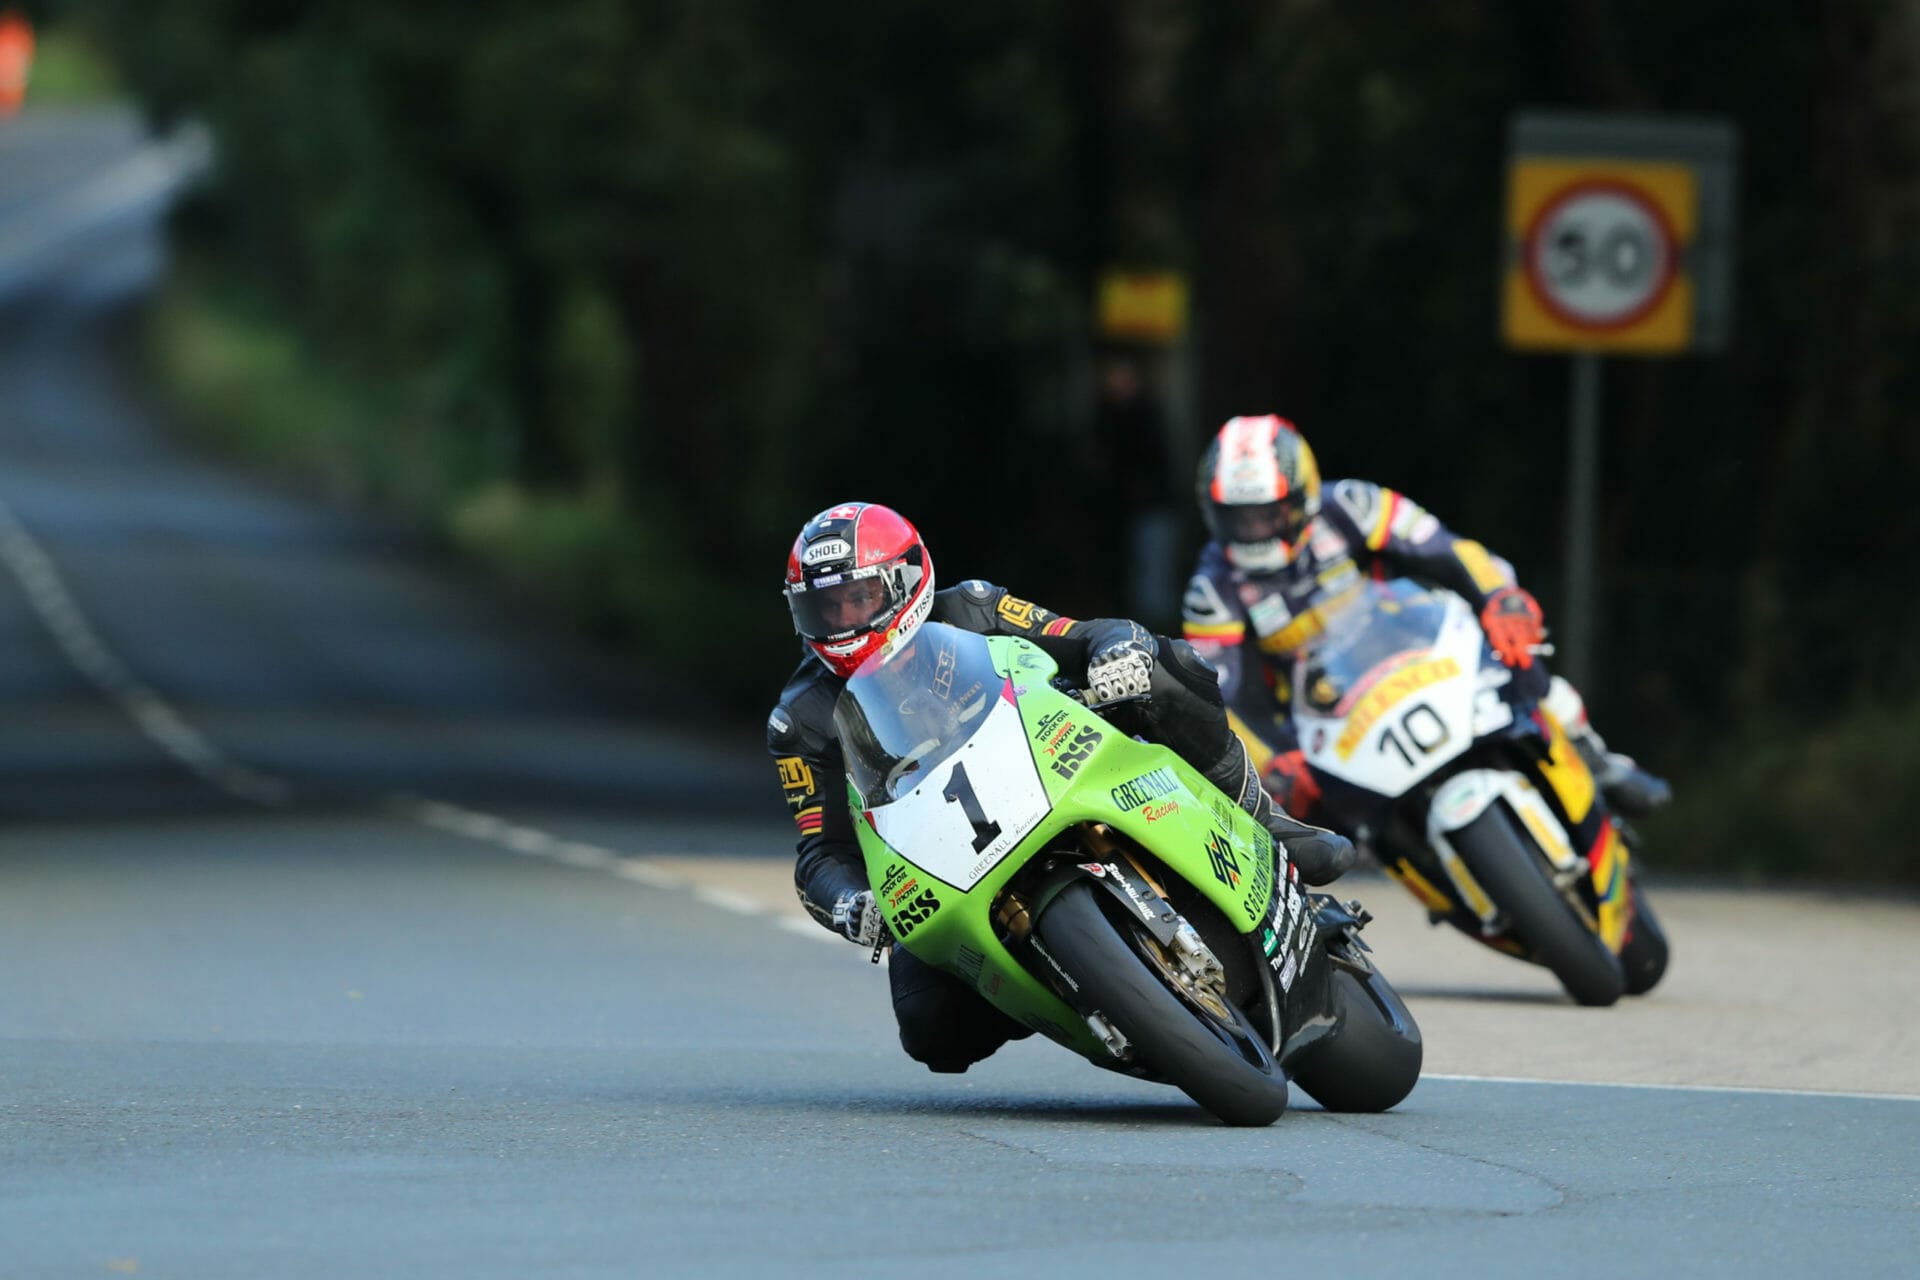 Classic TT 2021 also canceled
- also in the MOTORCYCLES.NEWS APP